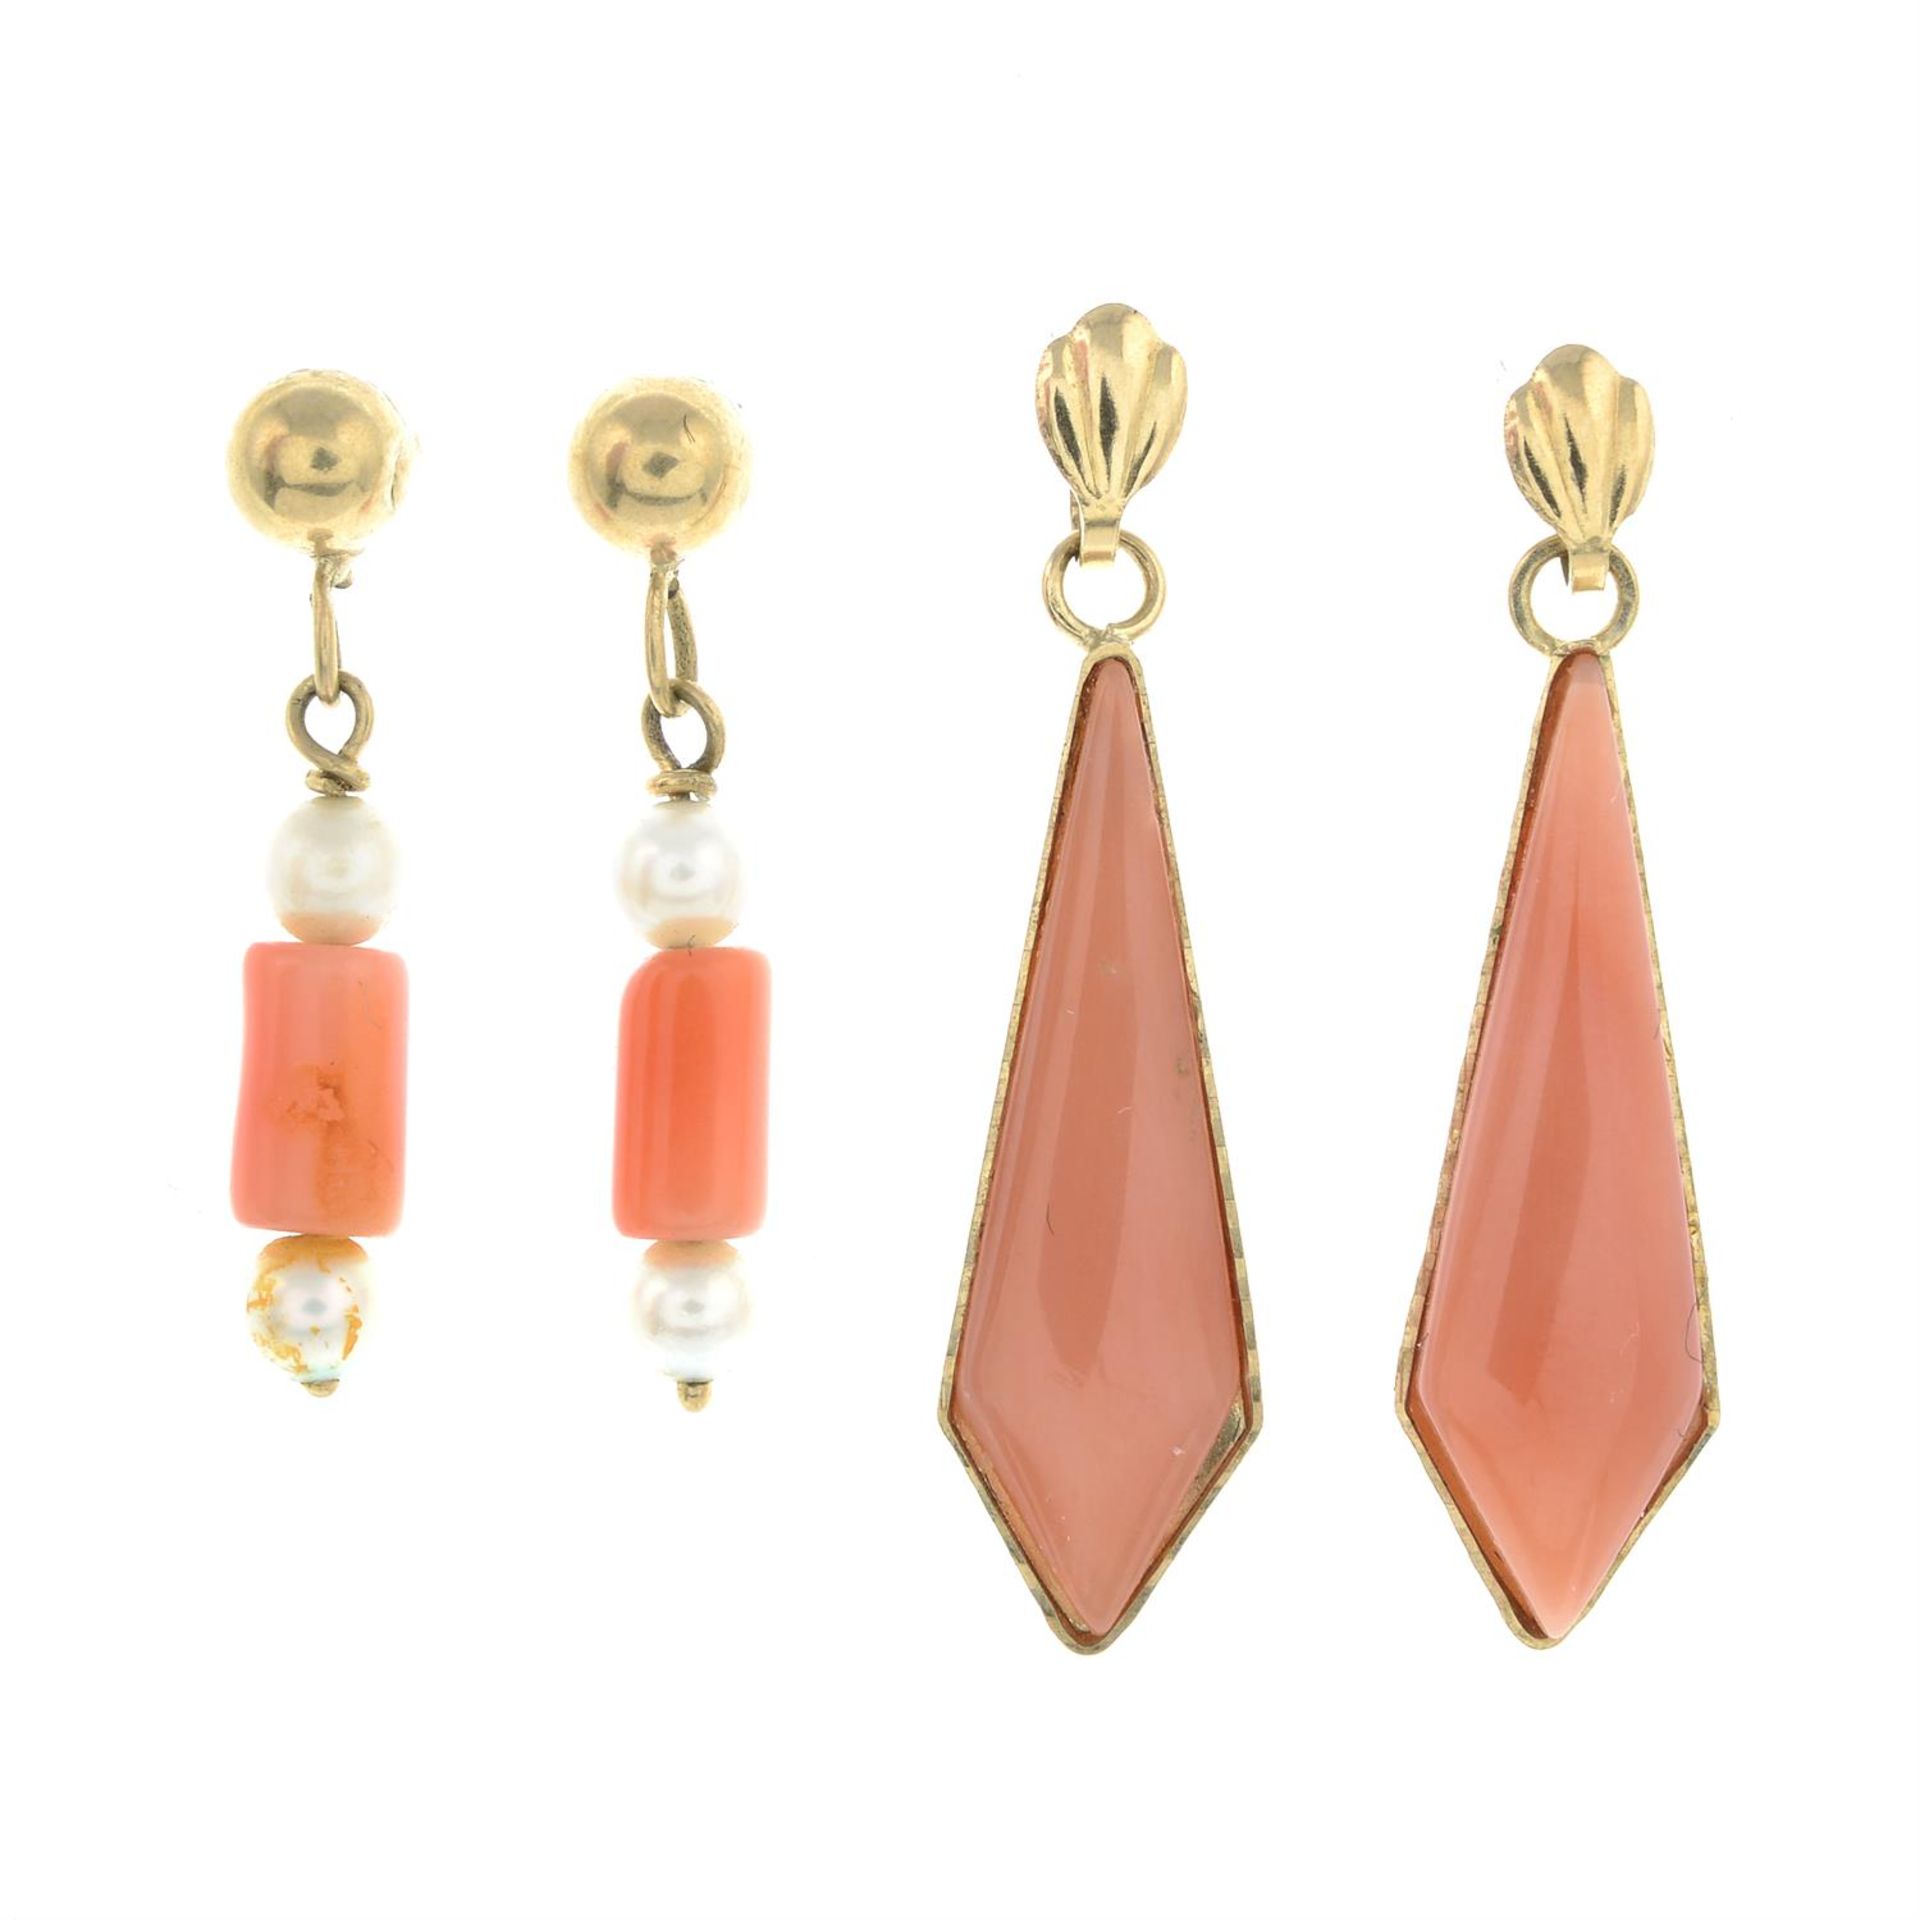 Two pairs of coral stud earrings, one pair with seed pearl spacers.